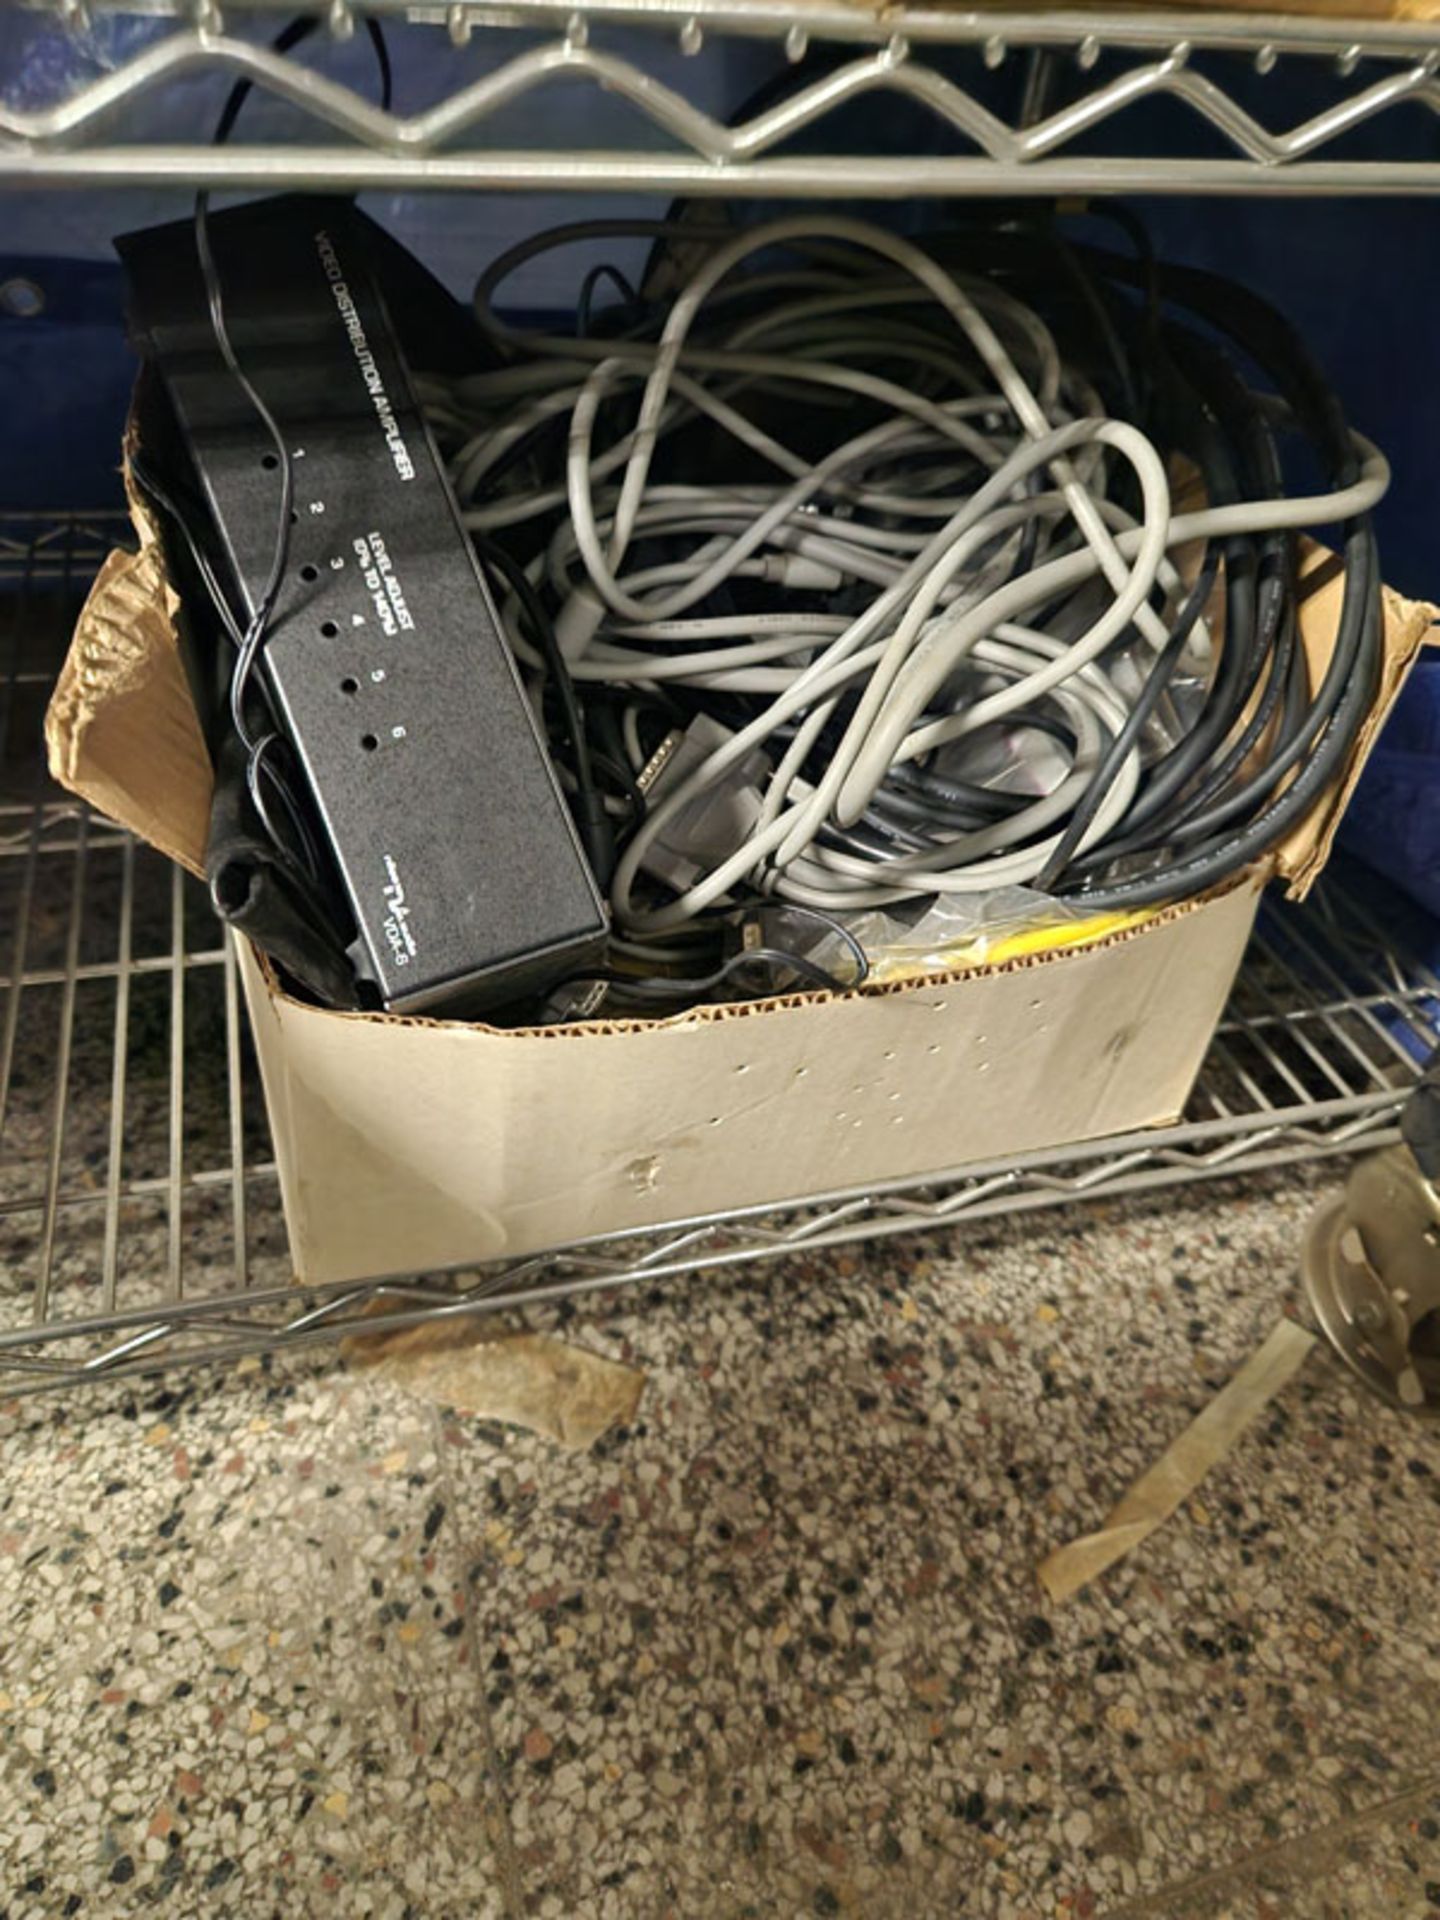 VIDEO DISTRIBUTION AMPLIFIER AND MISCELLANOUS CORDS IN BOX